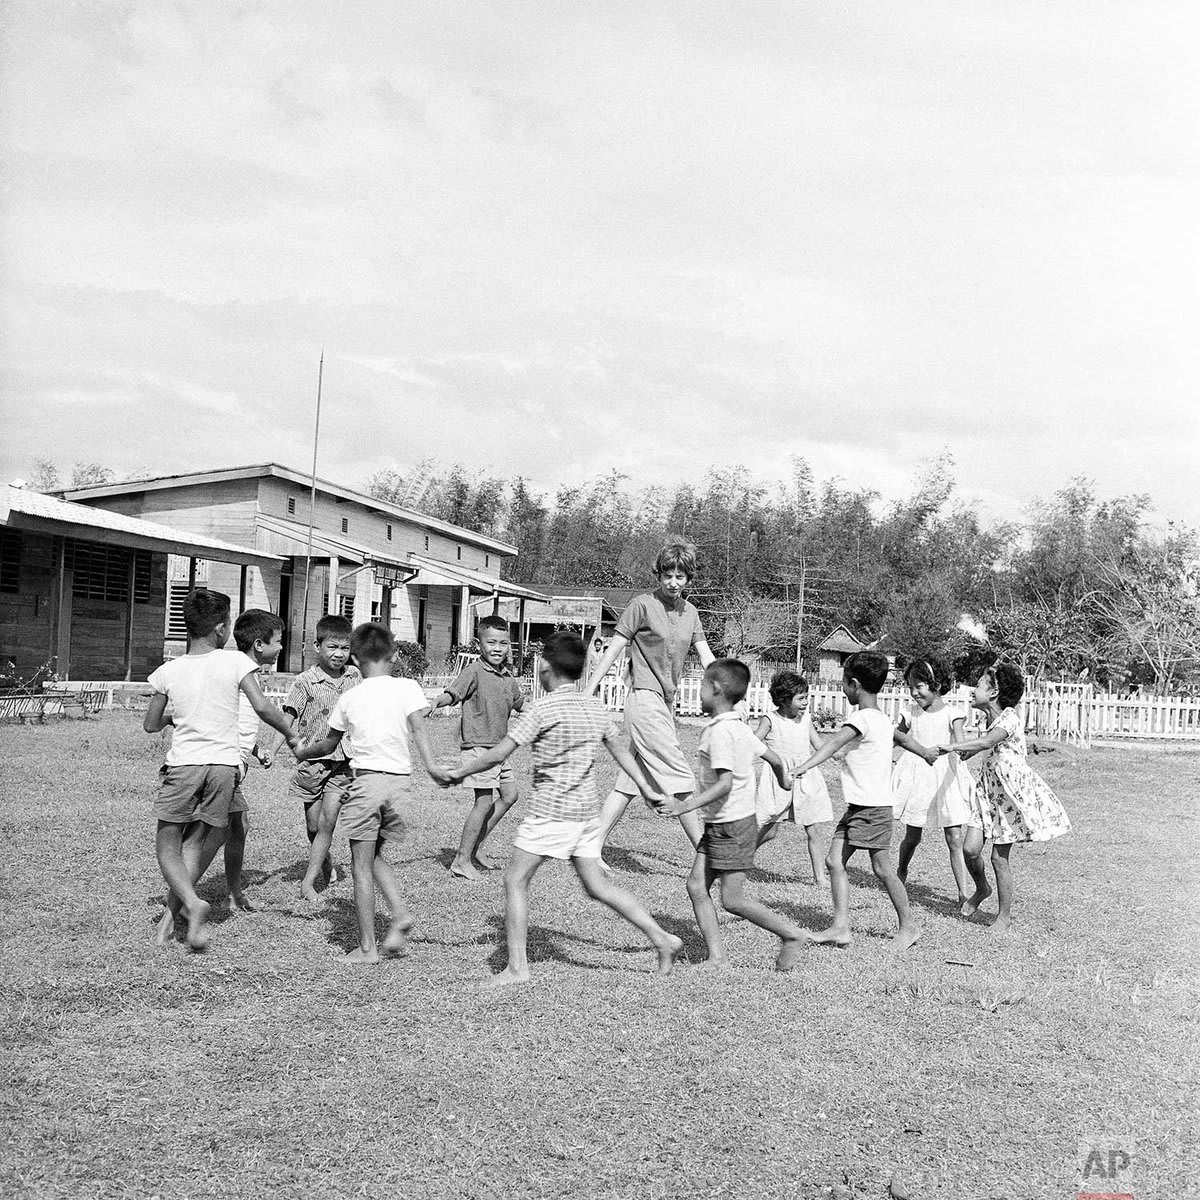 OTD in 1961, President John F. Kennedy signed an executive order establishing the Peace Corps. Peace Corps volunteer Ann Snuggs of Geneva, Ala., leads a game with Filipino children during recess at a school in San Enrique, Negros Island, Philippines, March 14, 1962.